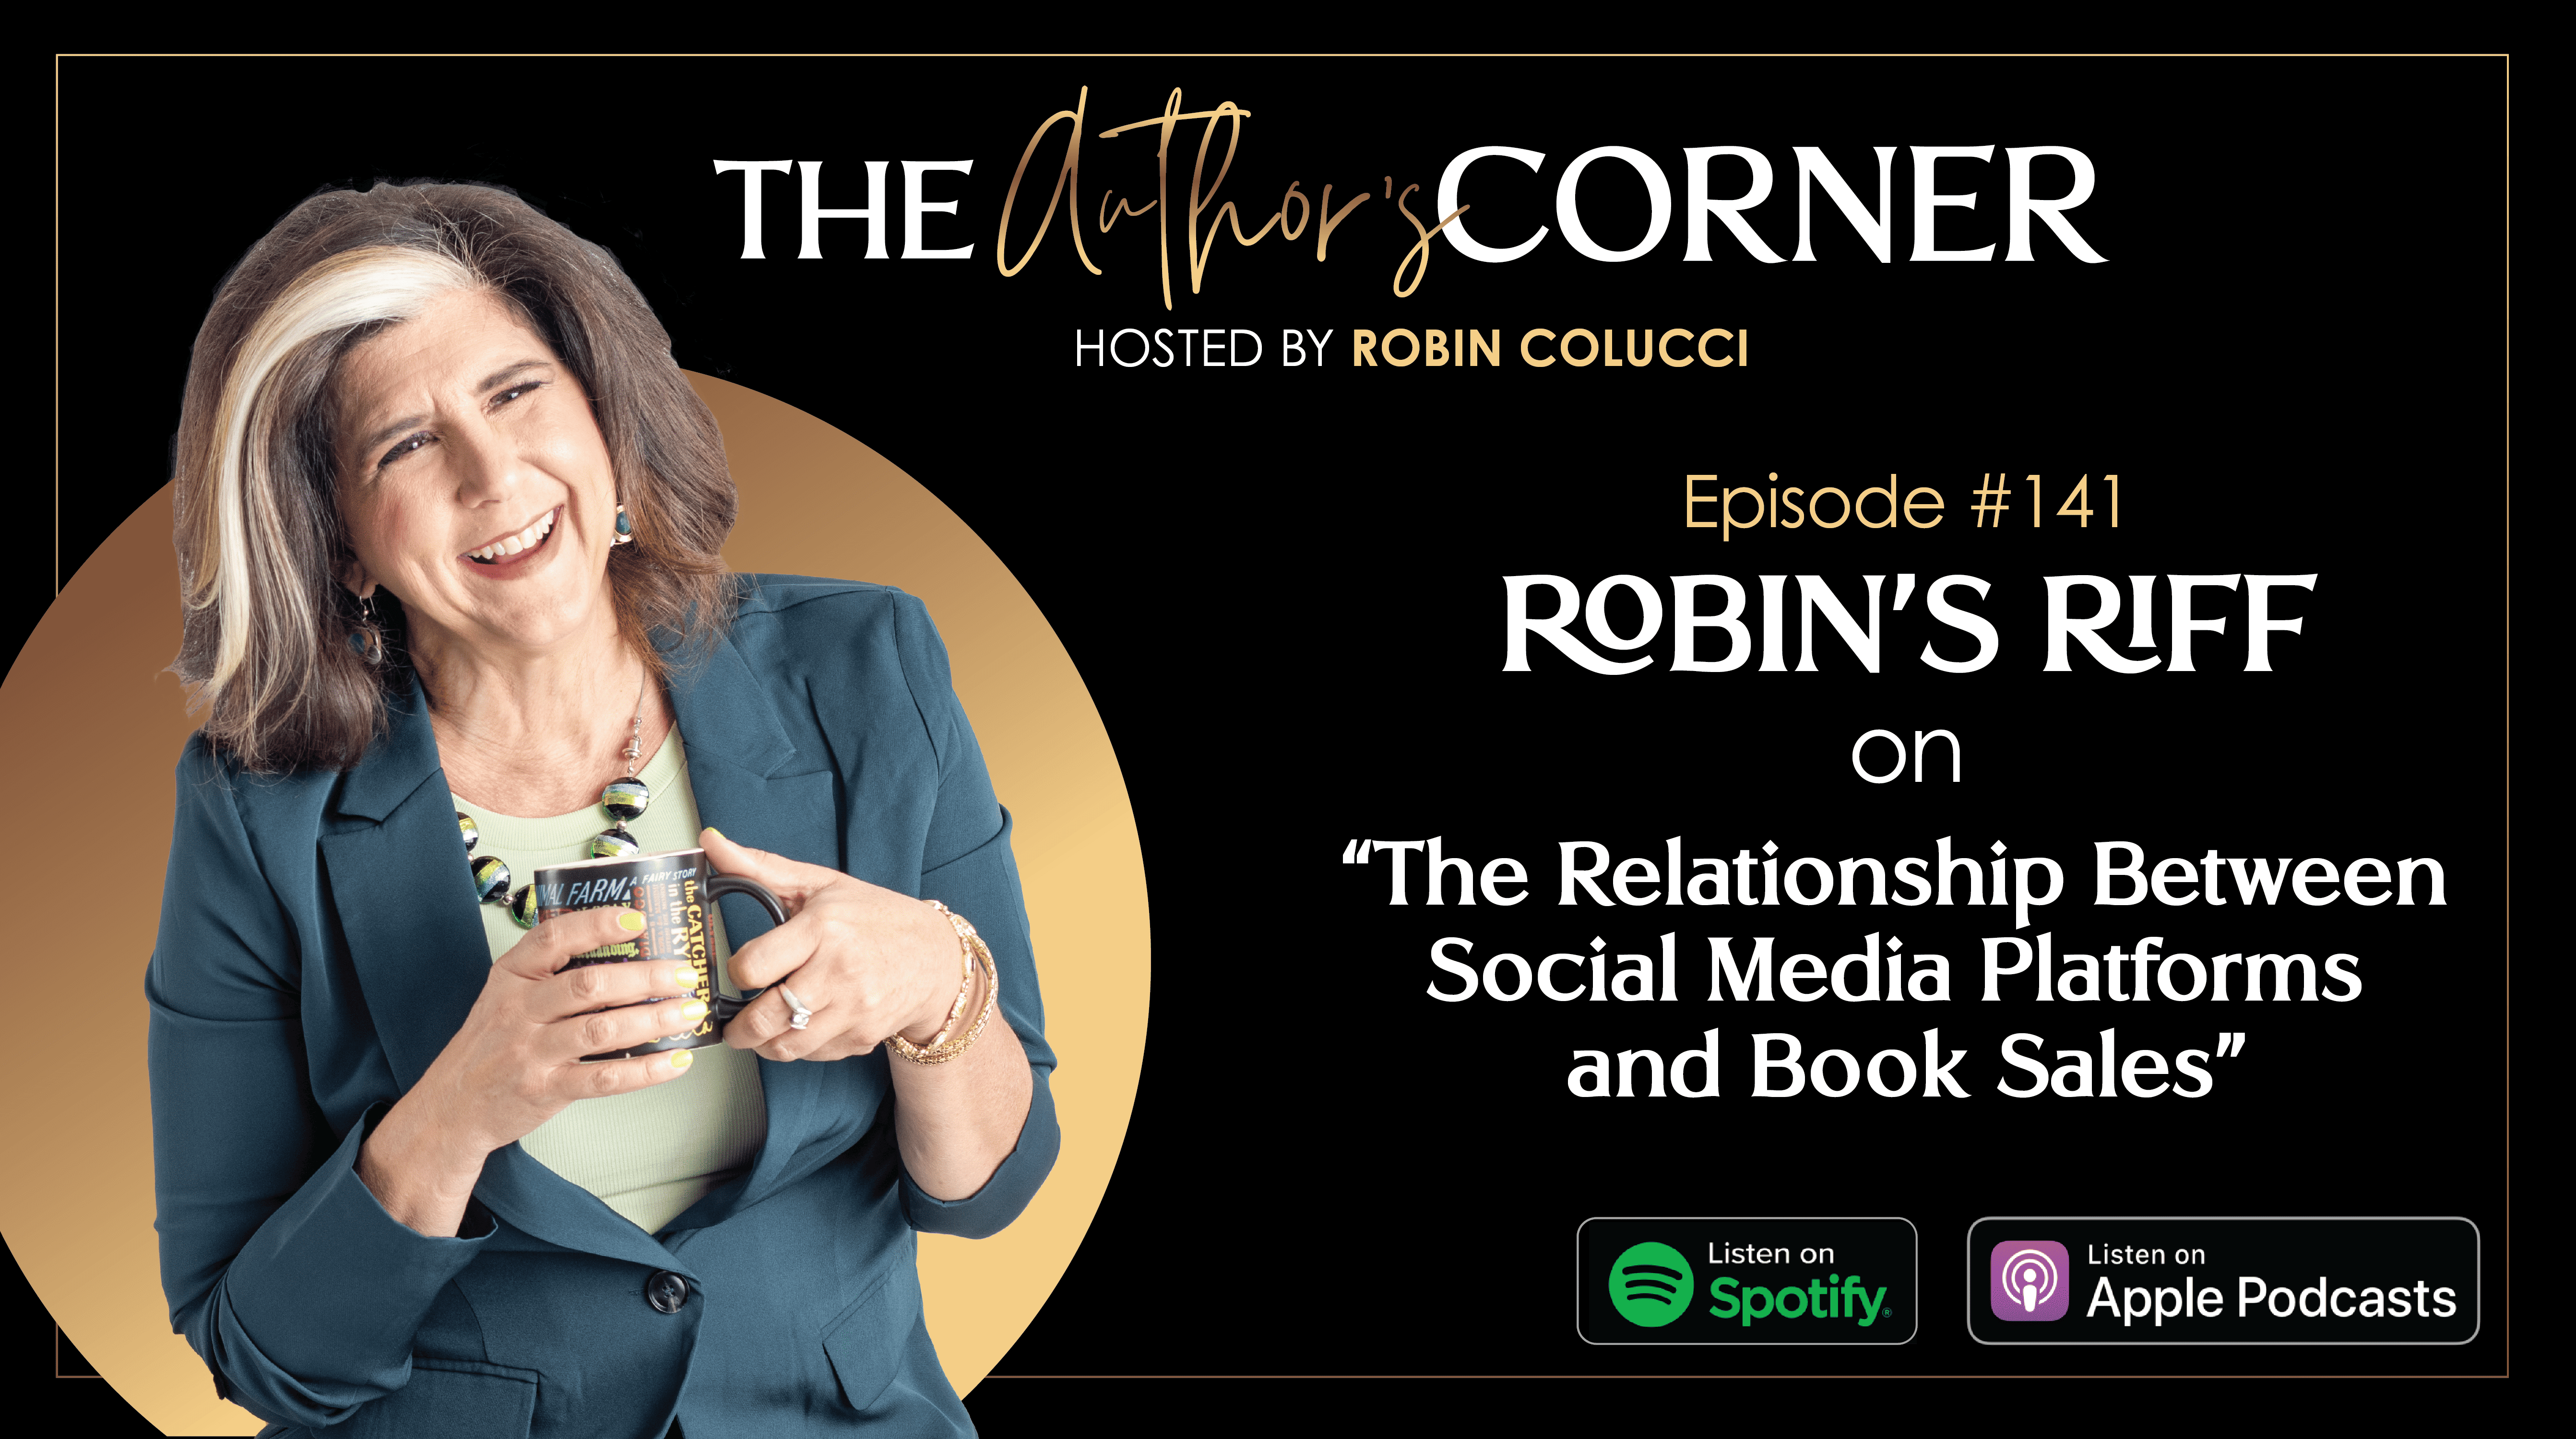 Robin’s Riff on “The Relationship Between Social Media Platforms and Book Sales”